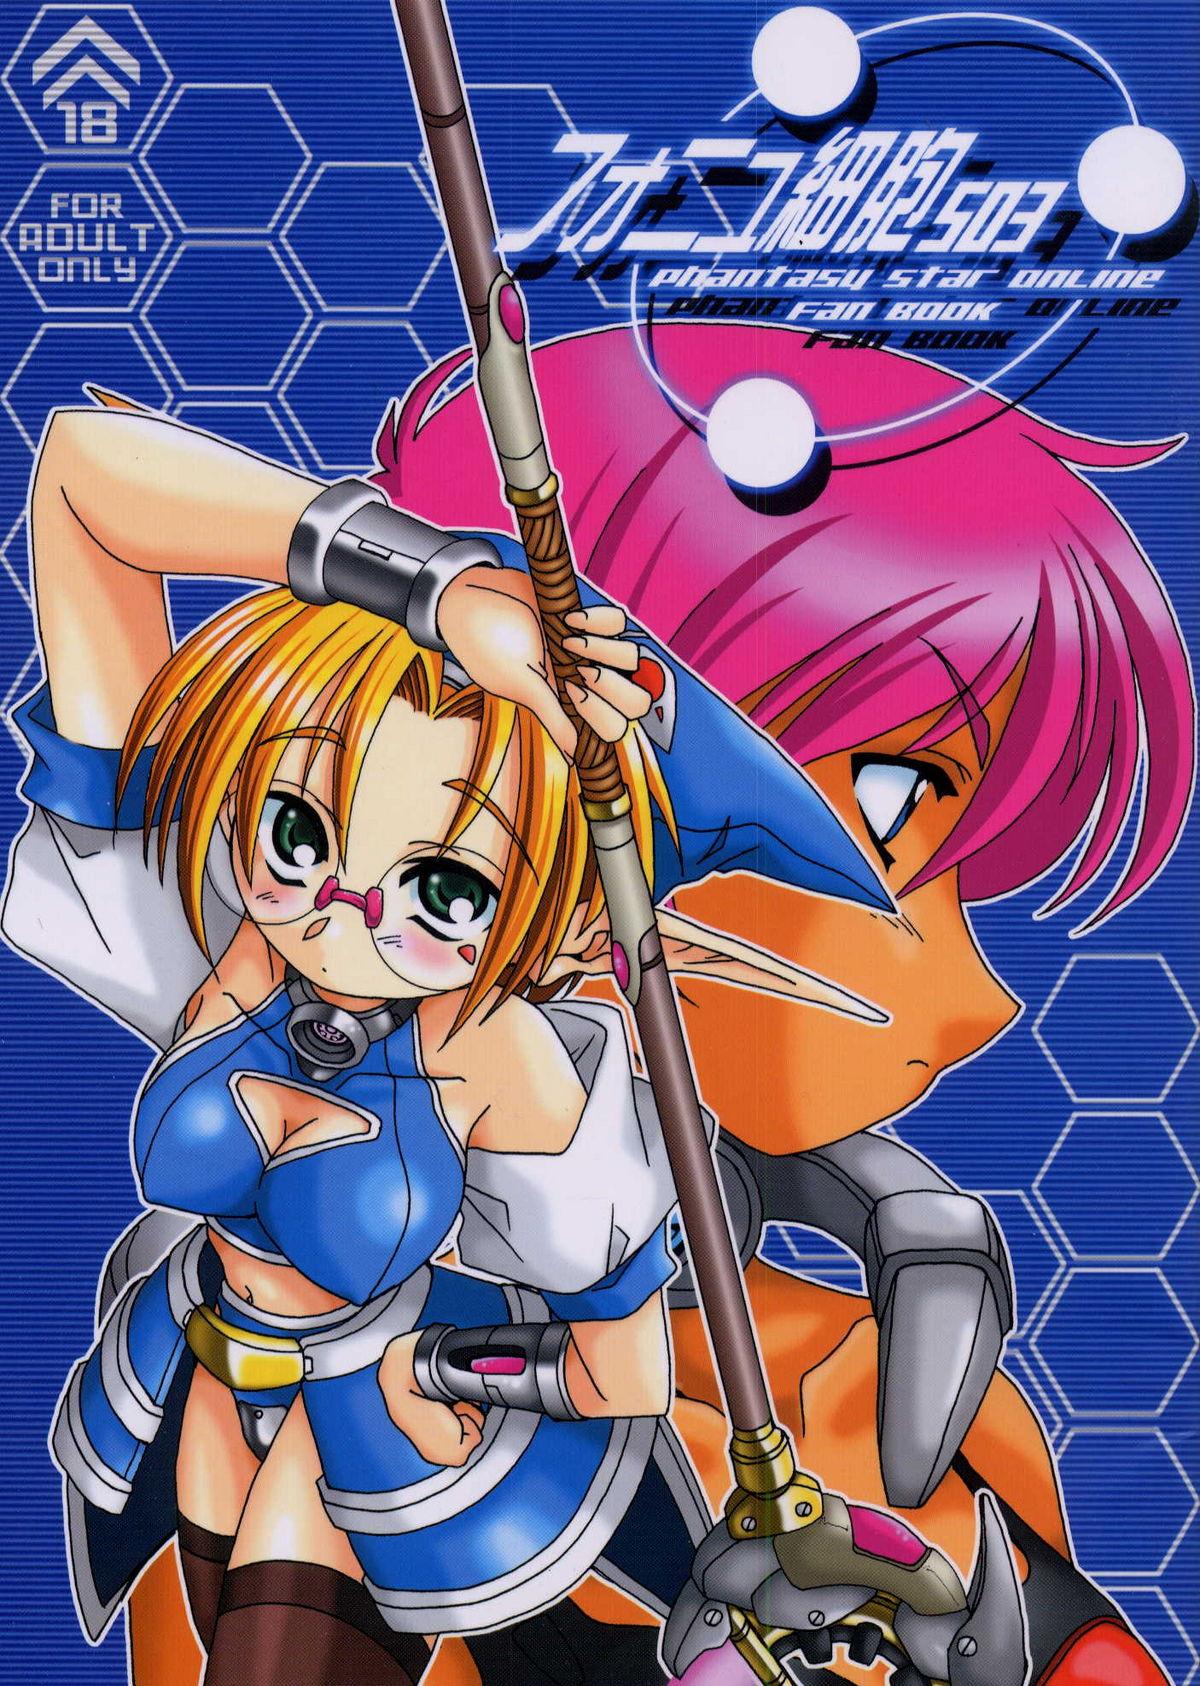 Gay PSO fanbook - Phantasy star online Femdom - Picture 1